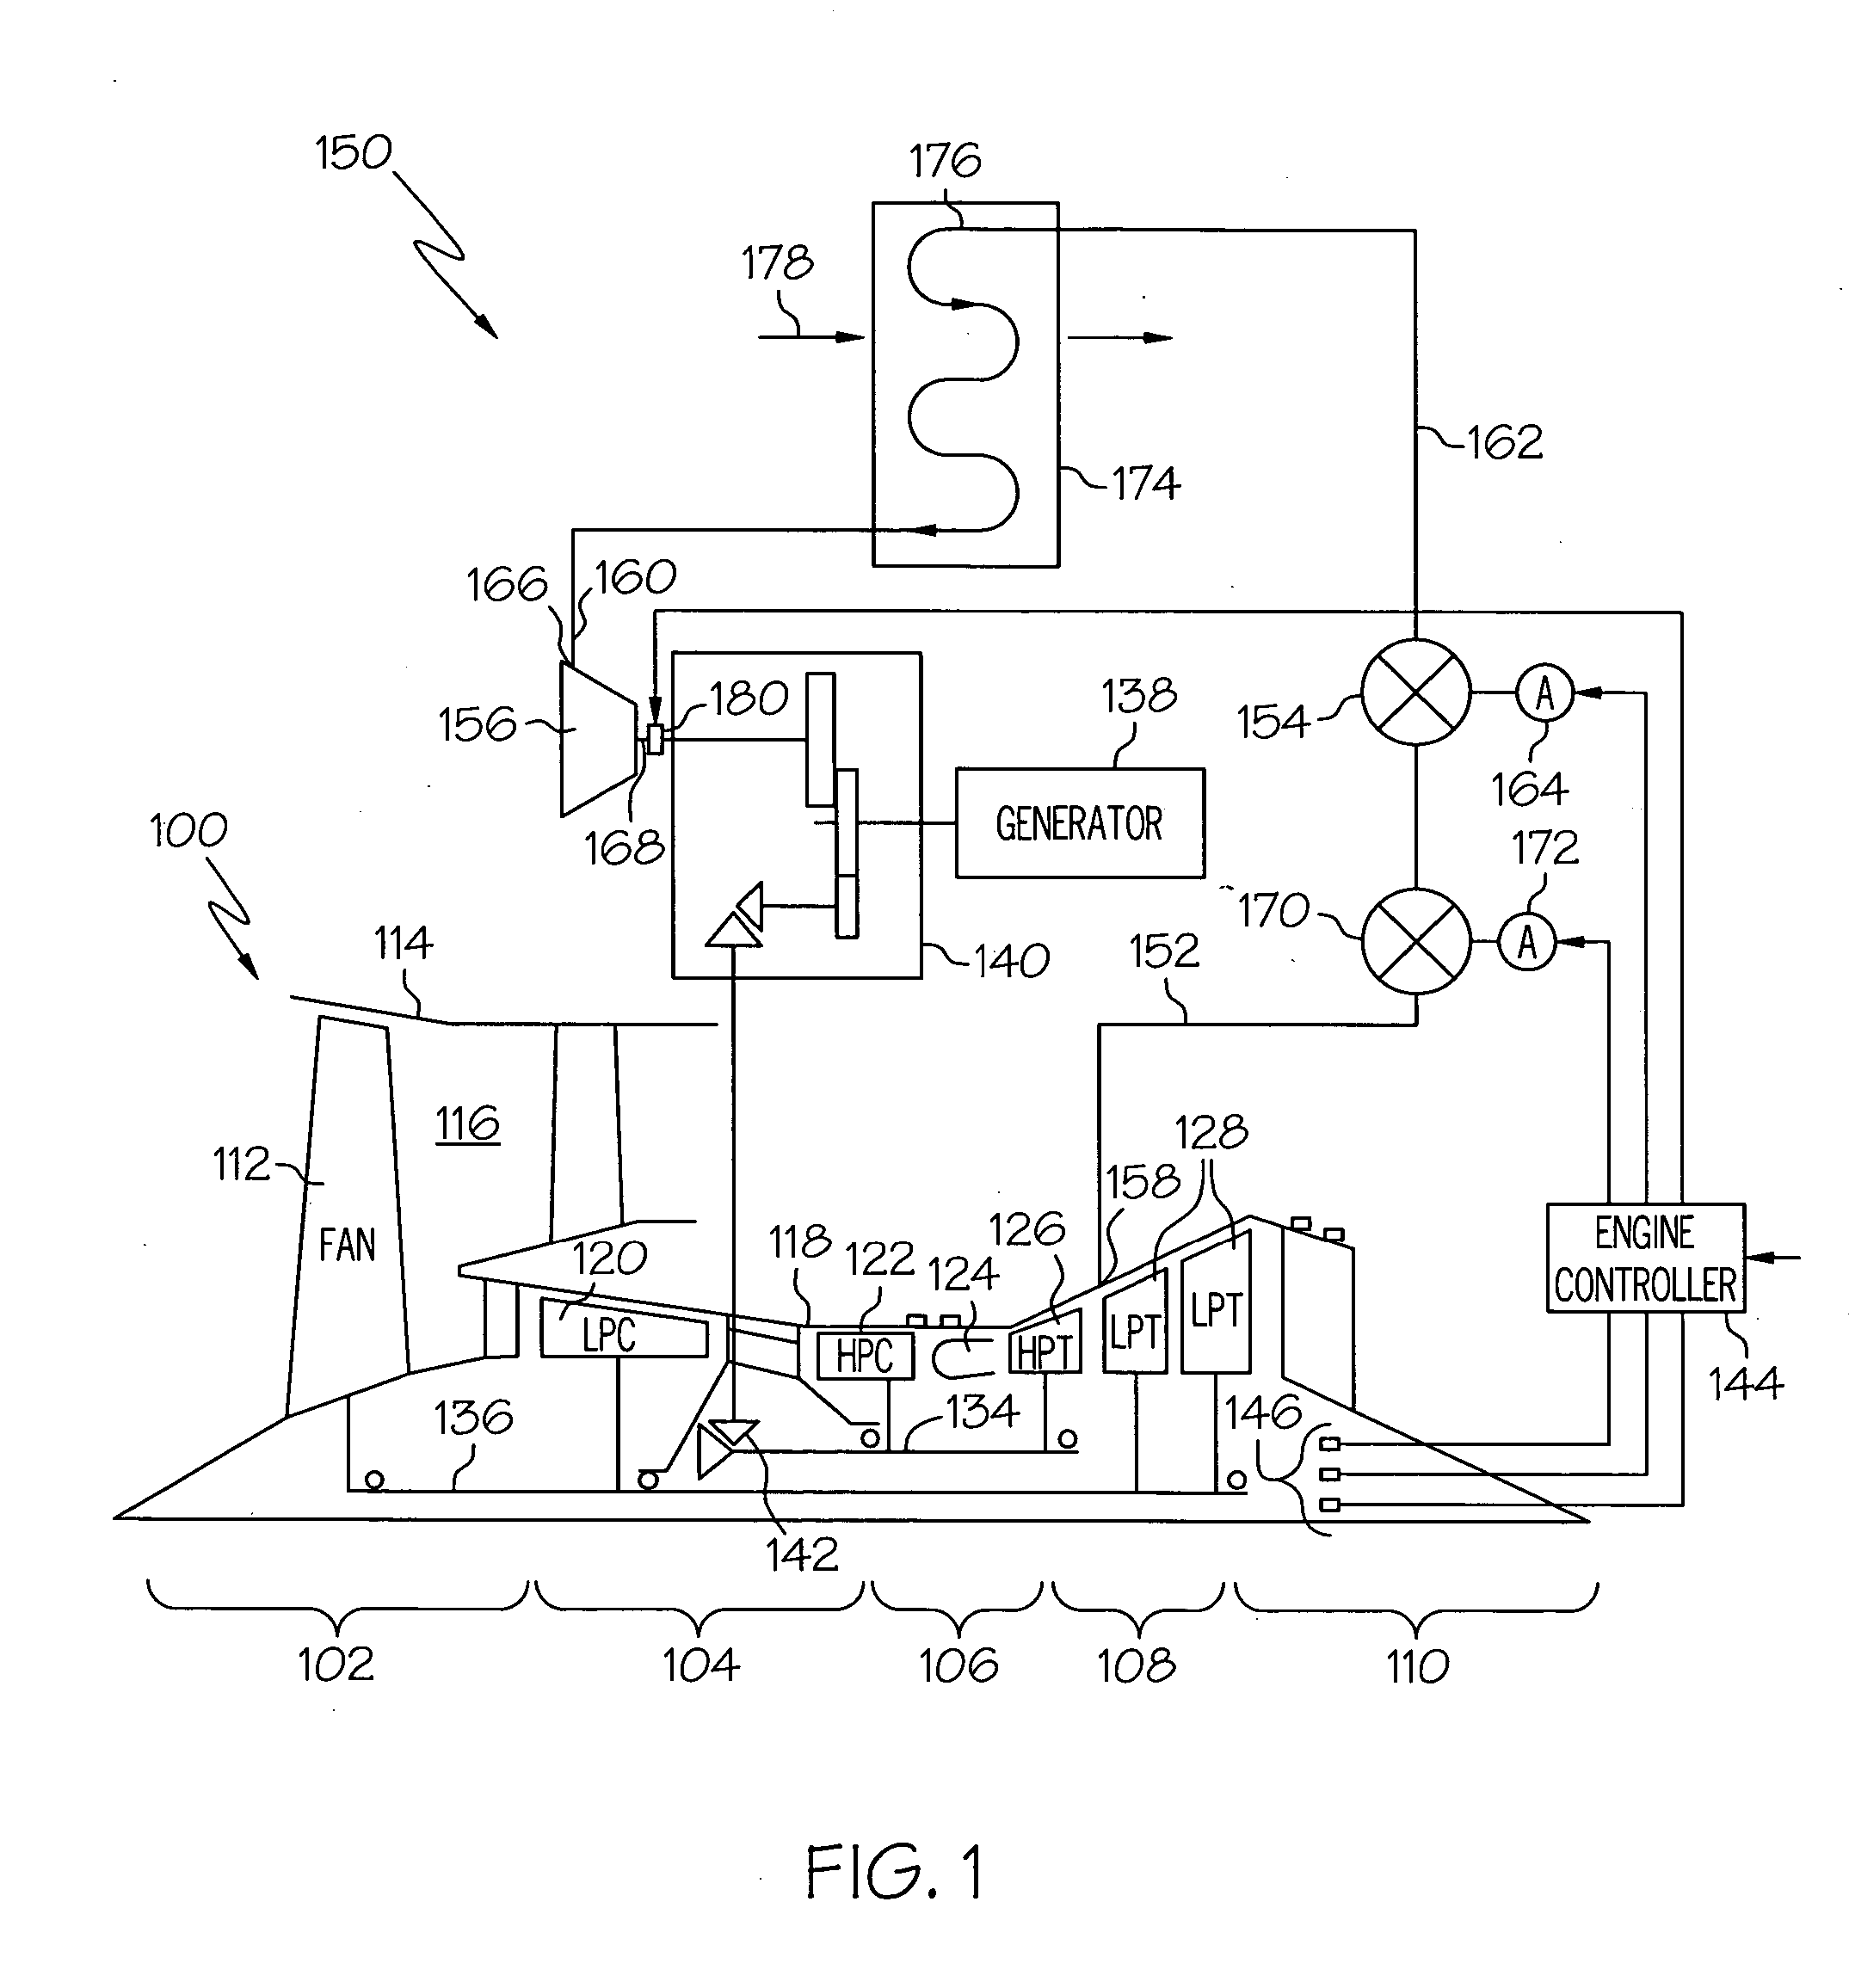 Gas turbine engine bleed air power assist system and method